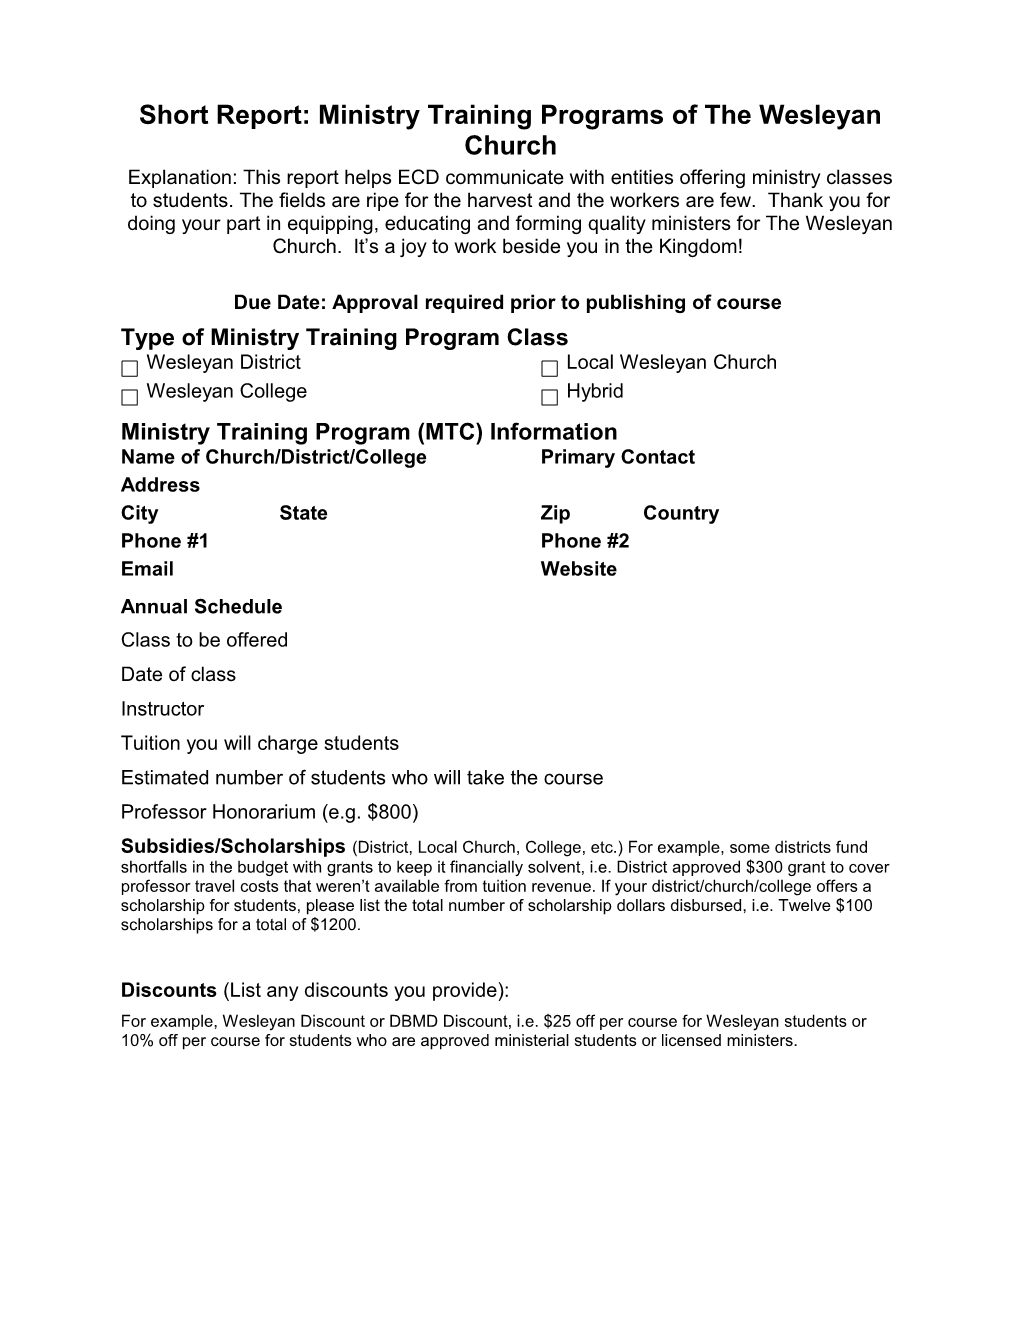 Short Report: Ministry Training Programs of the Wesleyan Church